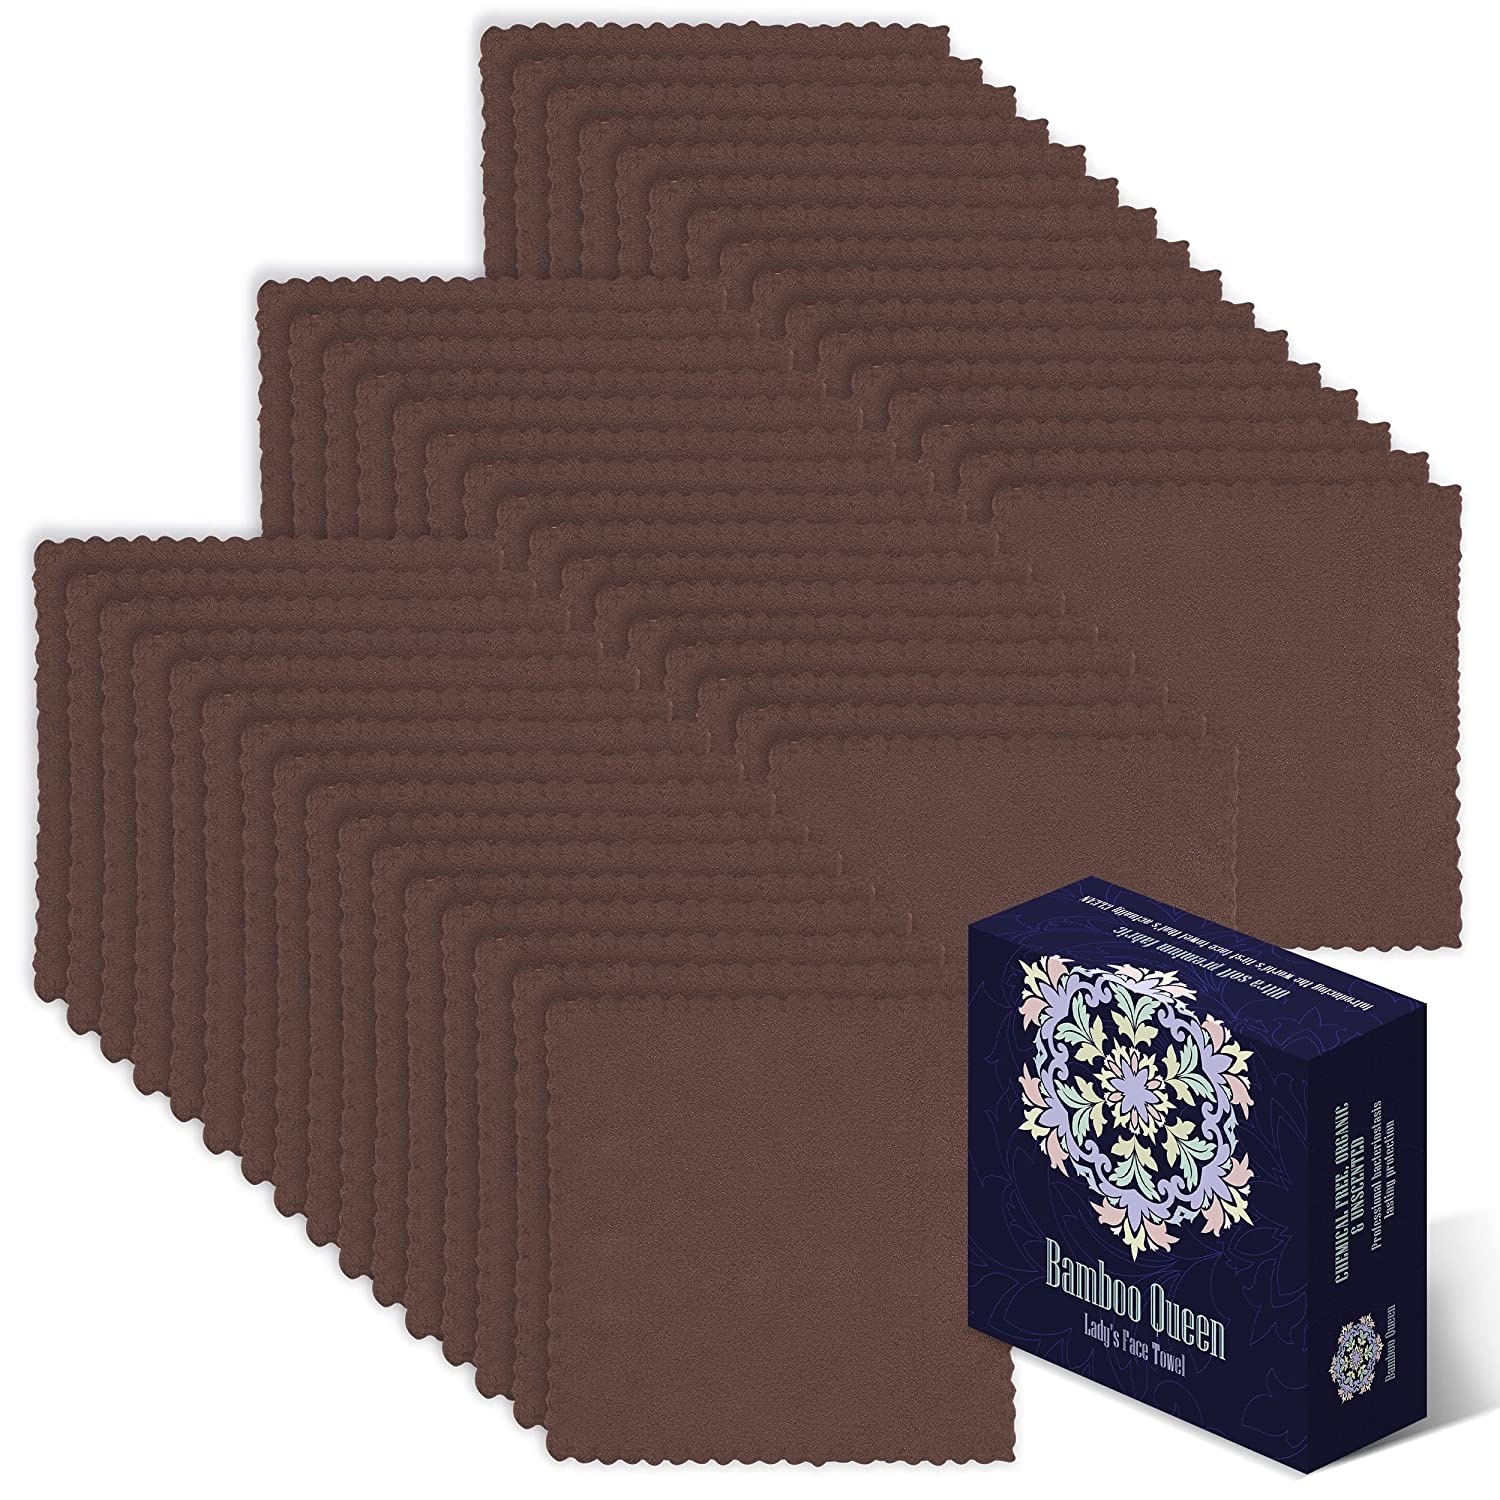 8" x 8" Bamboo Queen Super Soft Premium Microfiber Makeup Remover Cloths (various colors): 48-Count $8, 16-Count $4 + Free Shipping w/ Prime or on $25+